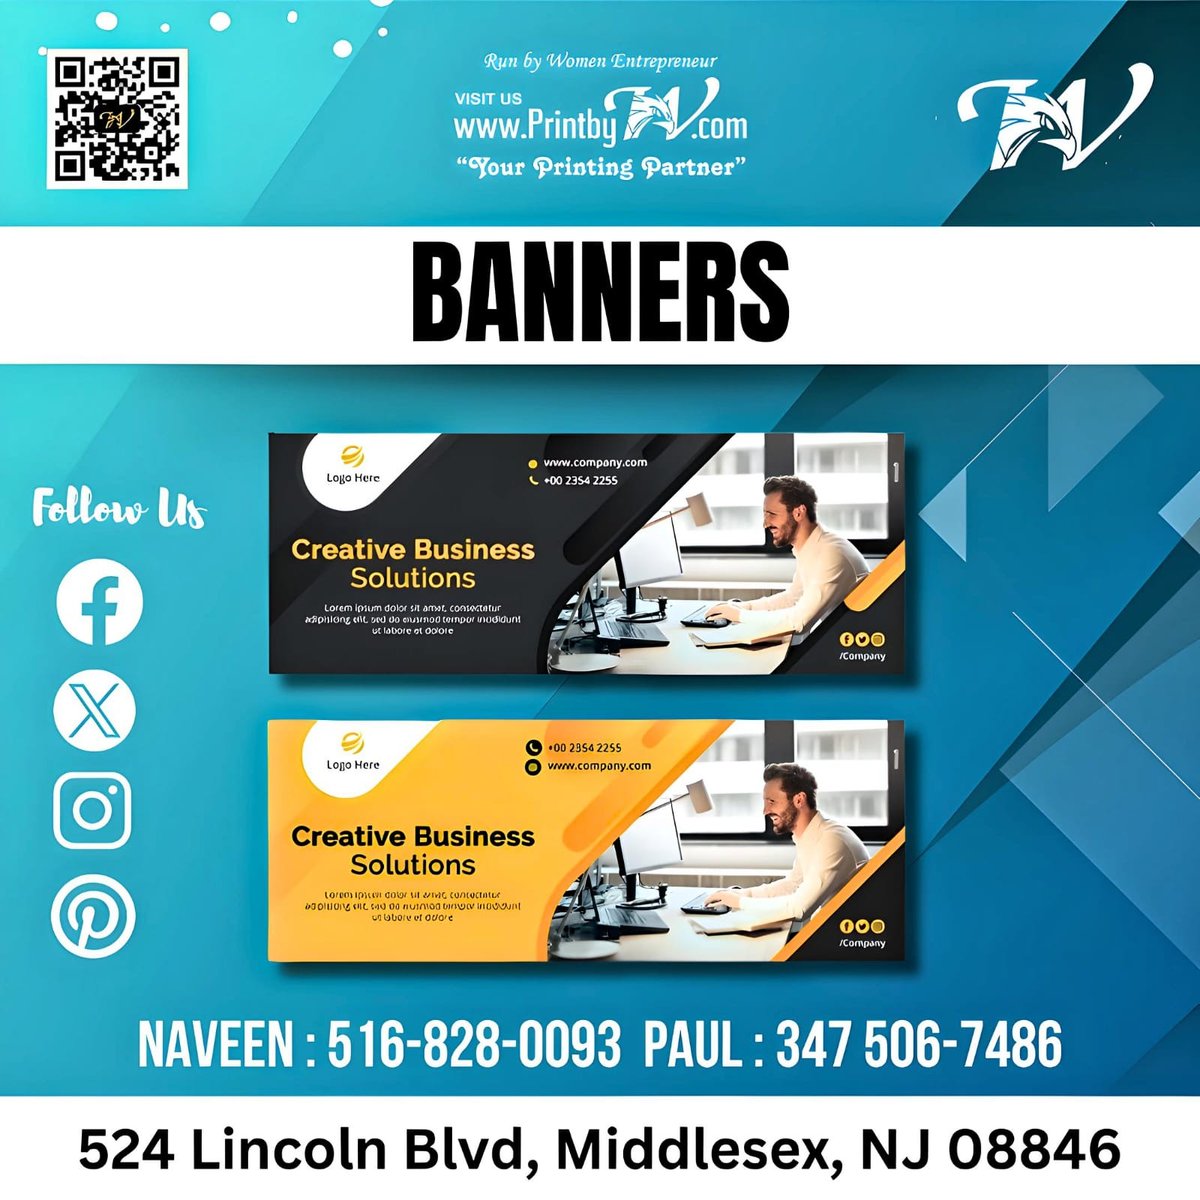 Unleash vibrant stories on our printed banners. Elevate your message with color and style. Stand out boldly! 📷 . printbyw.com . . Tags #PrintedMagic #ElevateYourBrand #Empoweryourbrand #BusinessCards #Flyers #essentials #printbyw #printandgraph #newyork #us